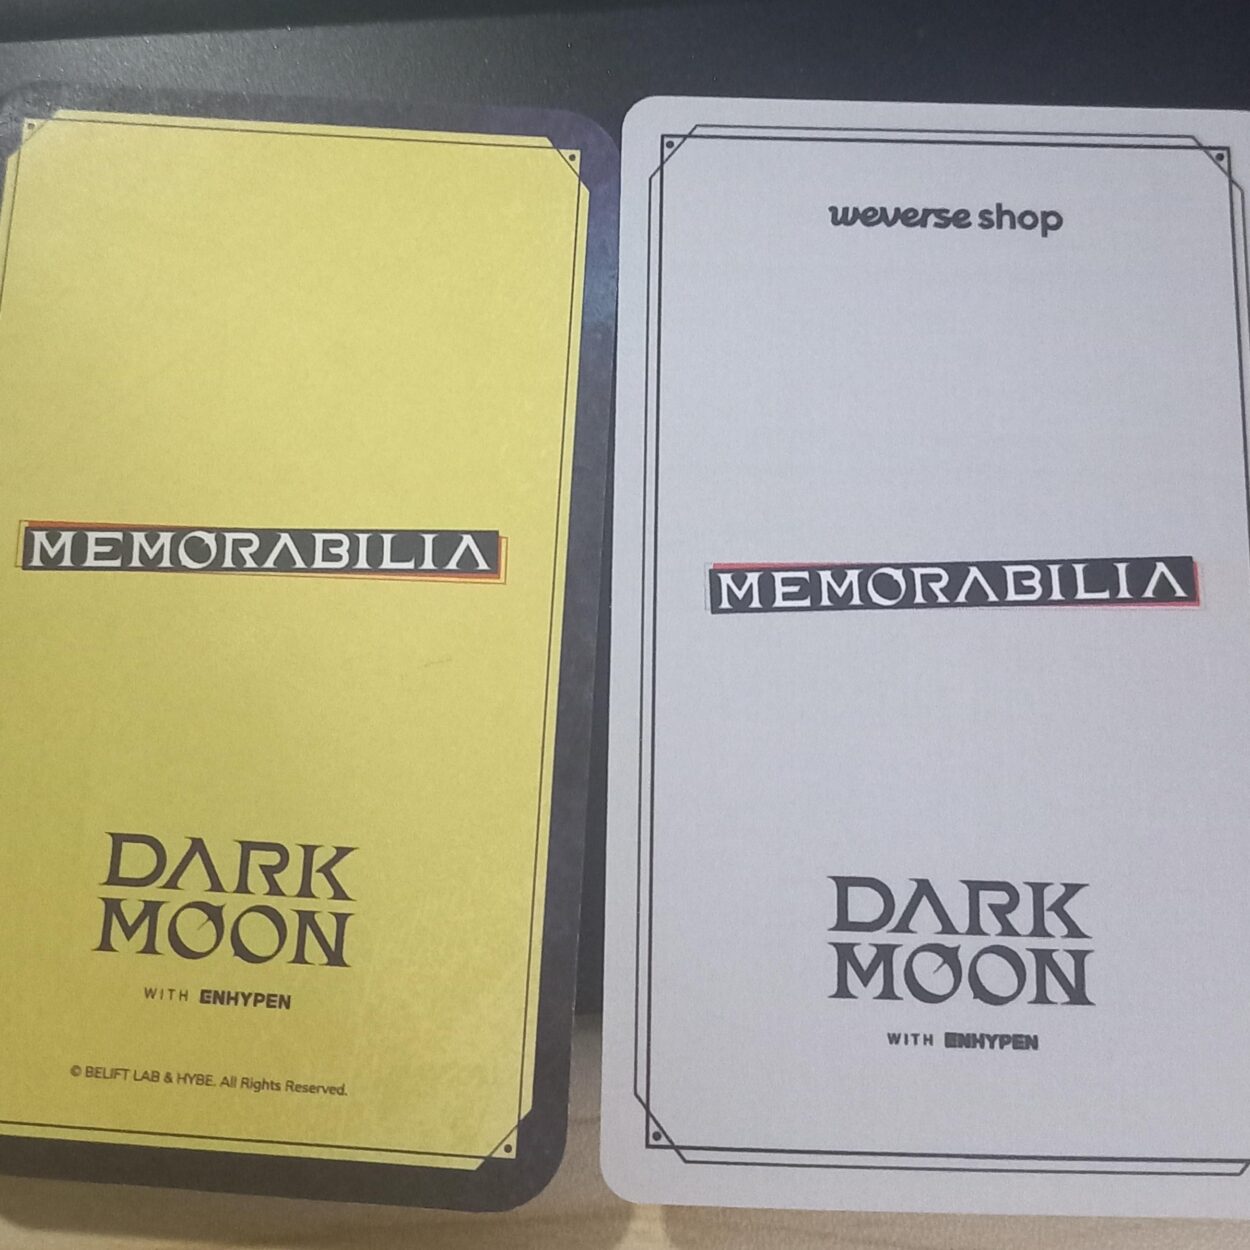 Difference between these cards?